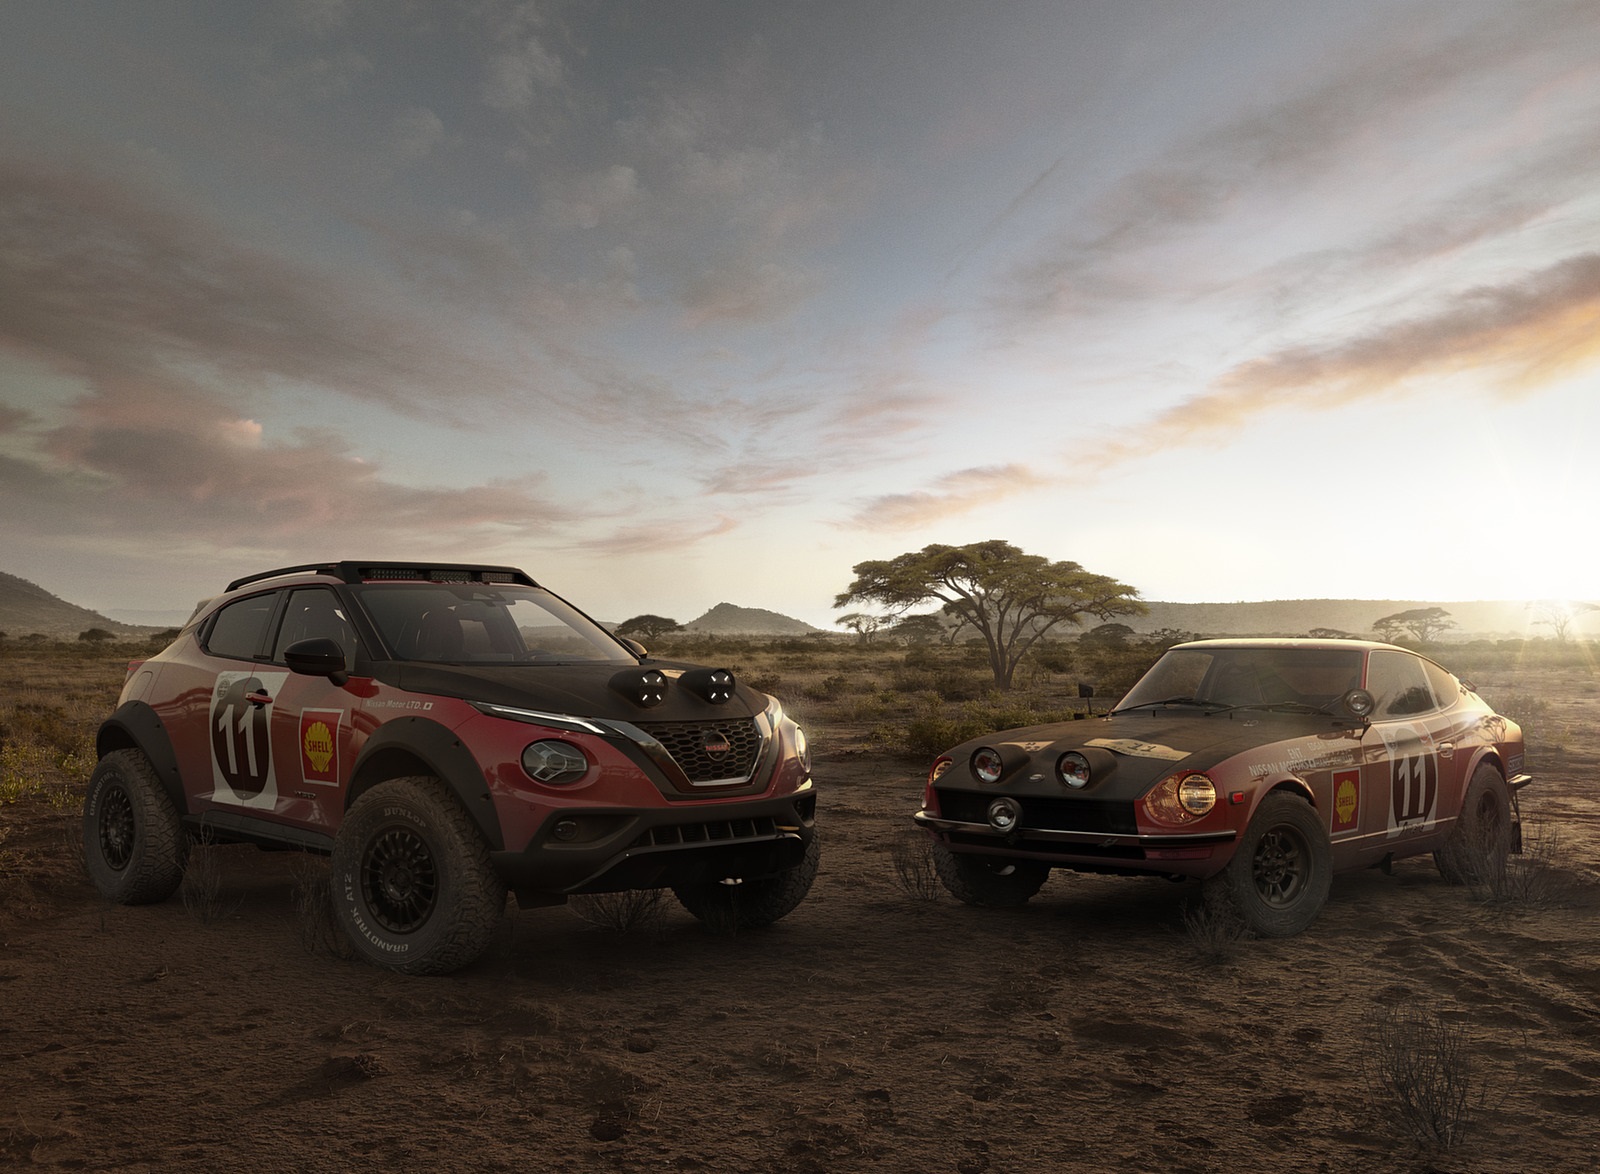 2021 Nissan JUKE Rally Tribute Concept and Datsun 240Z Wallpapers (2)